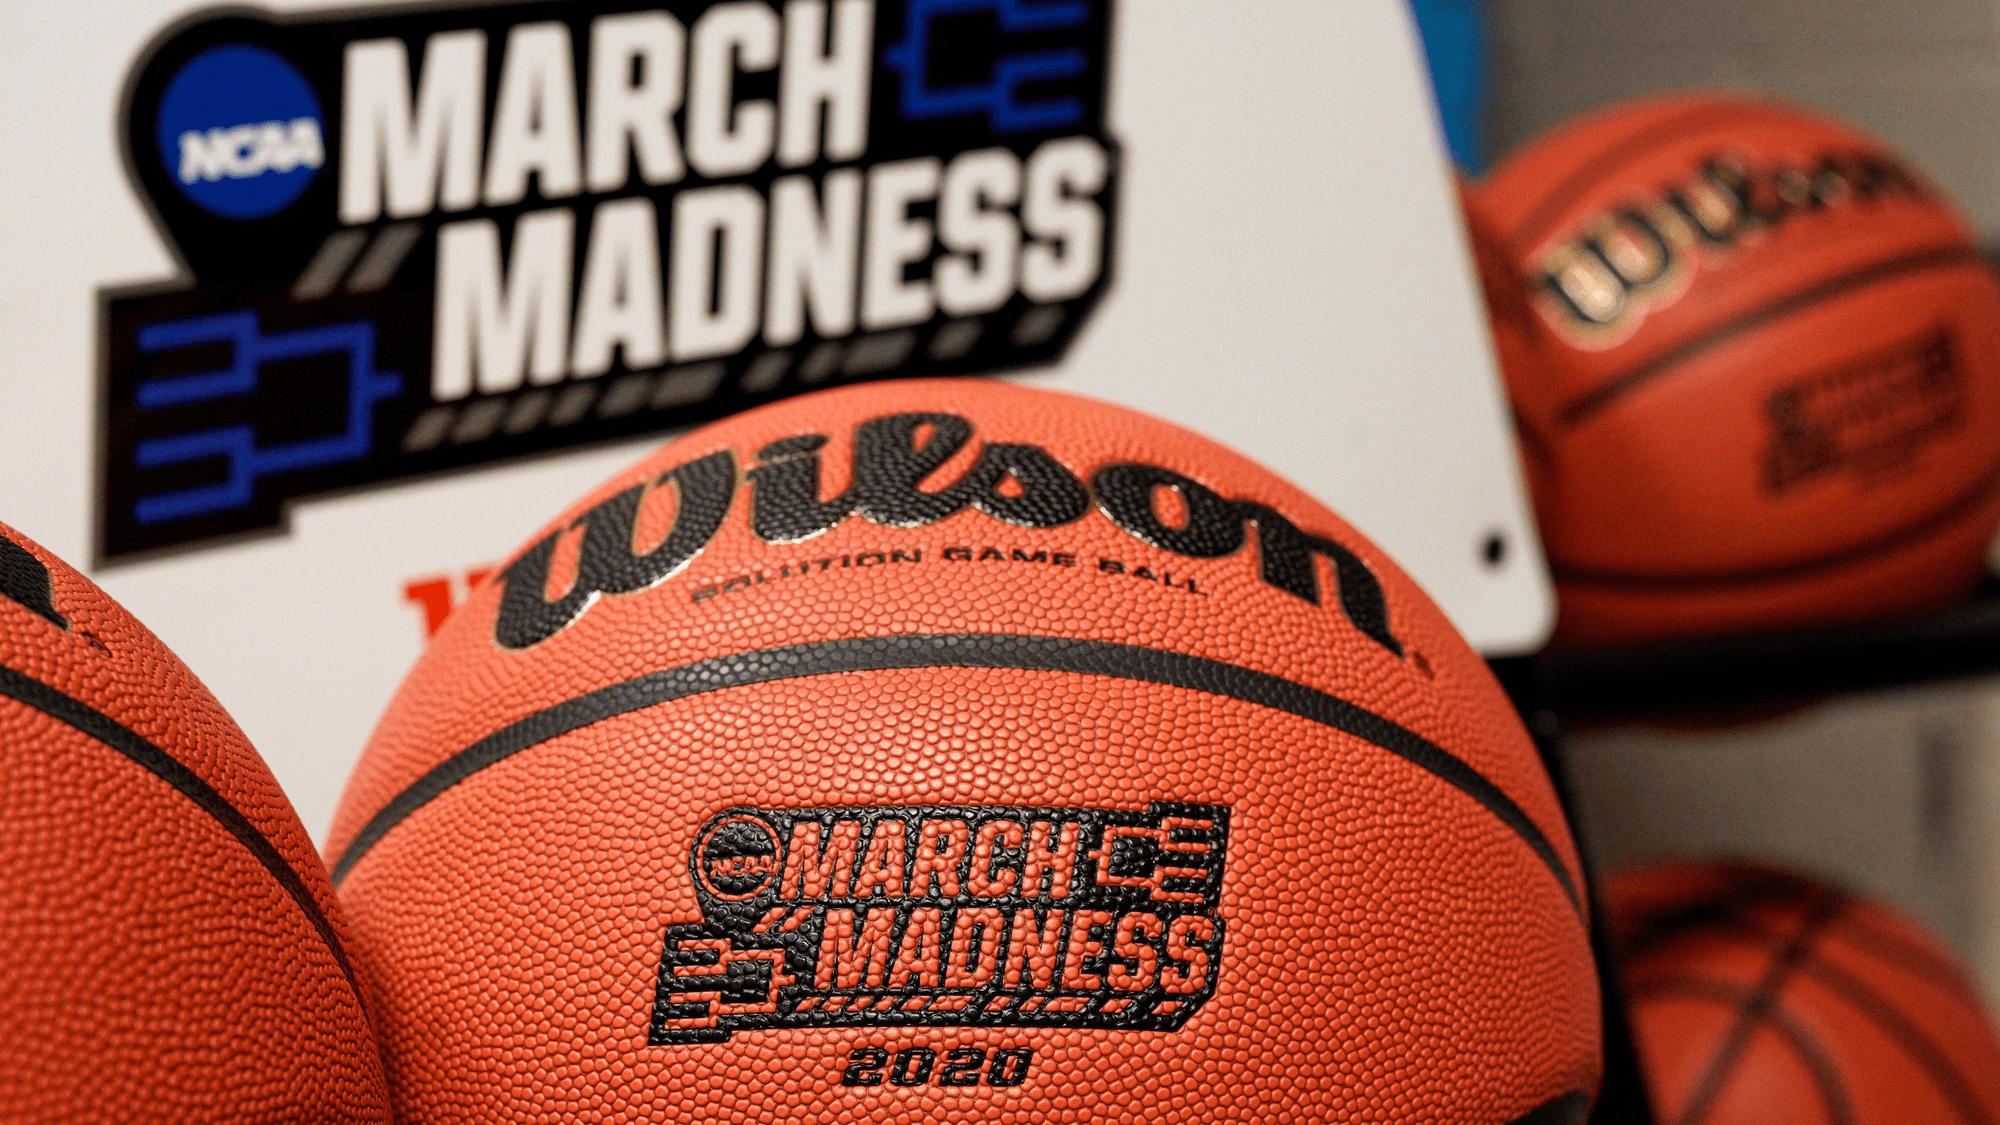 Odds to win March Madness: Best Bets and Dark Horse Candidates